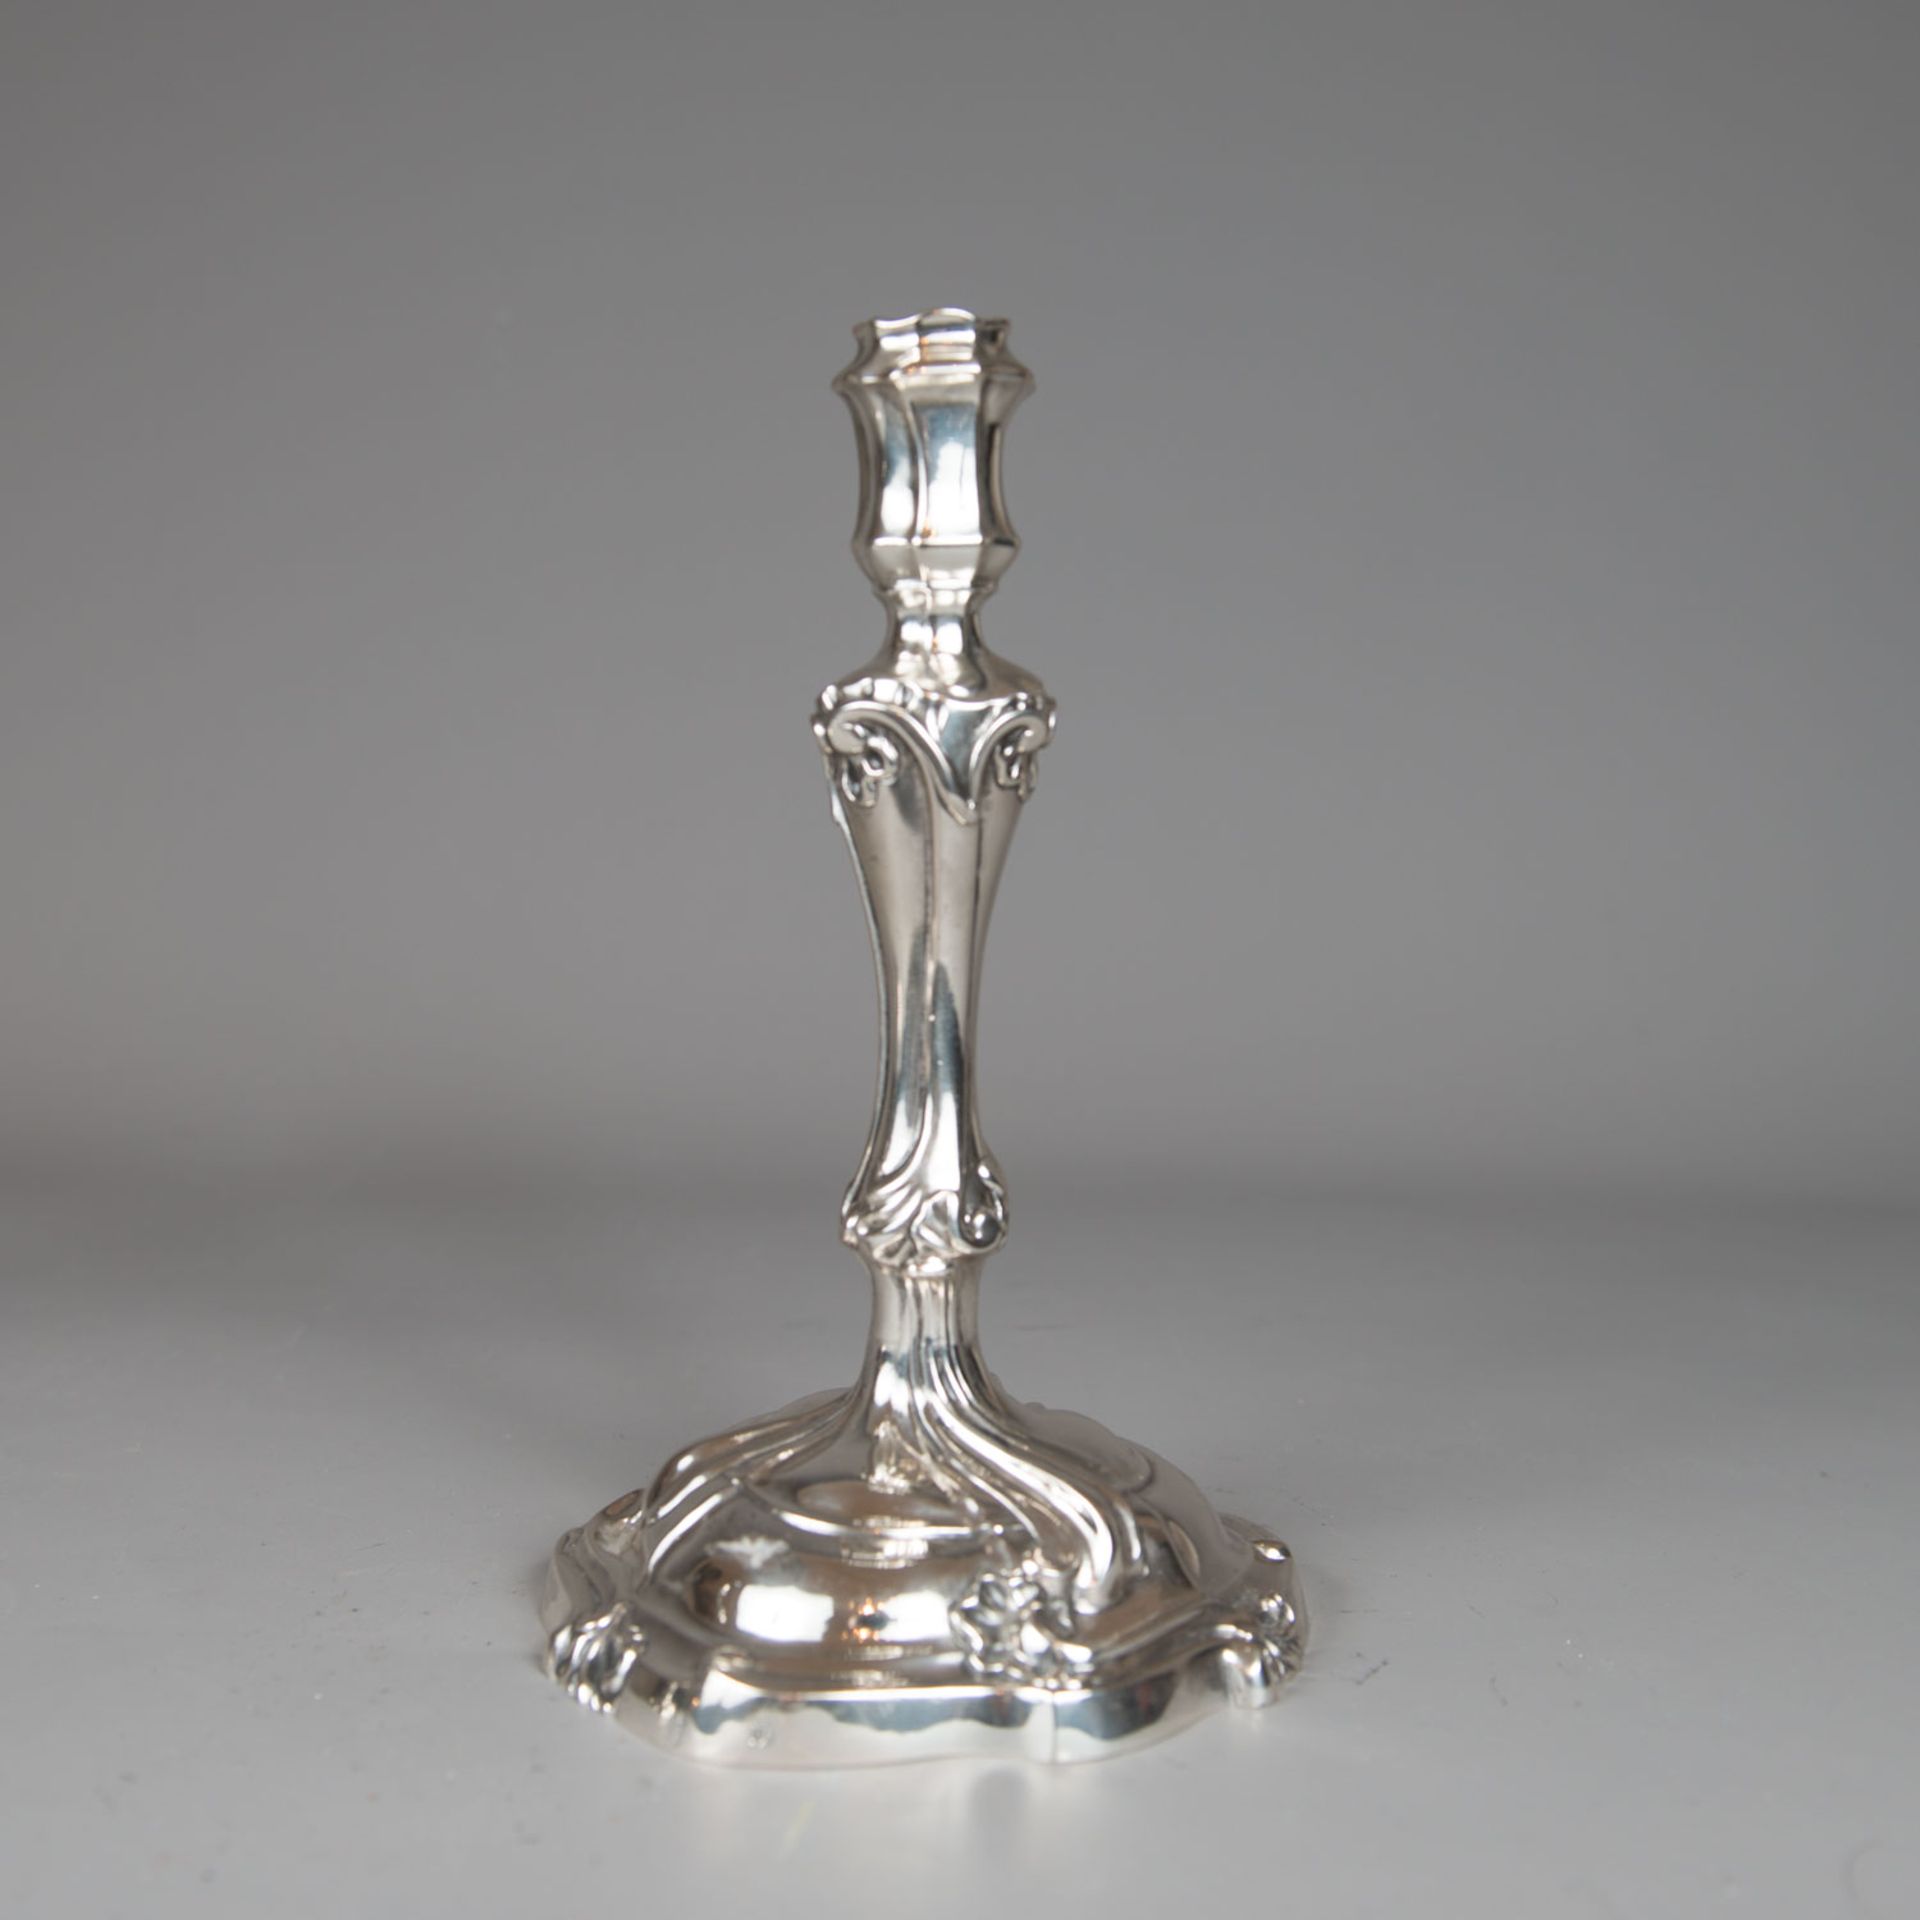 Pair of Baroque Silver Candlesticks - Image 2 of 3